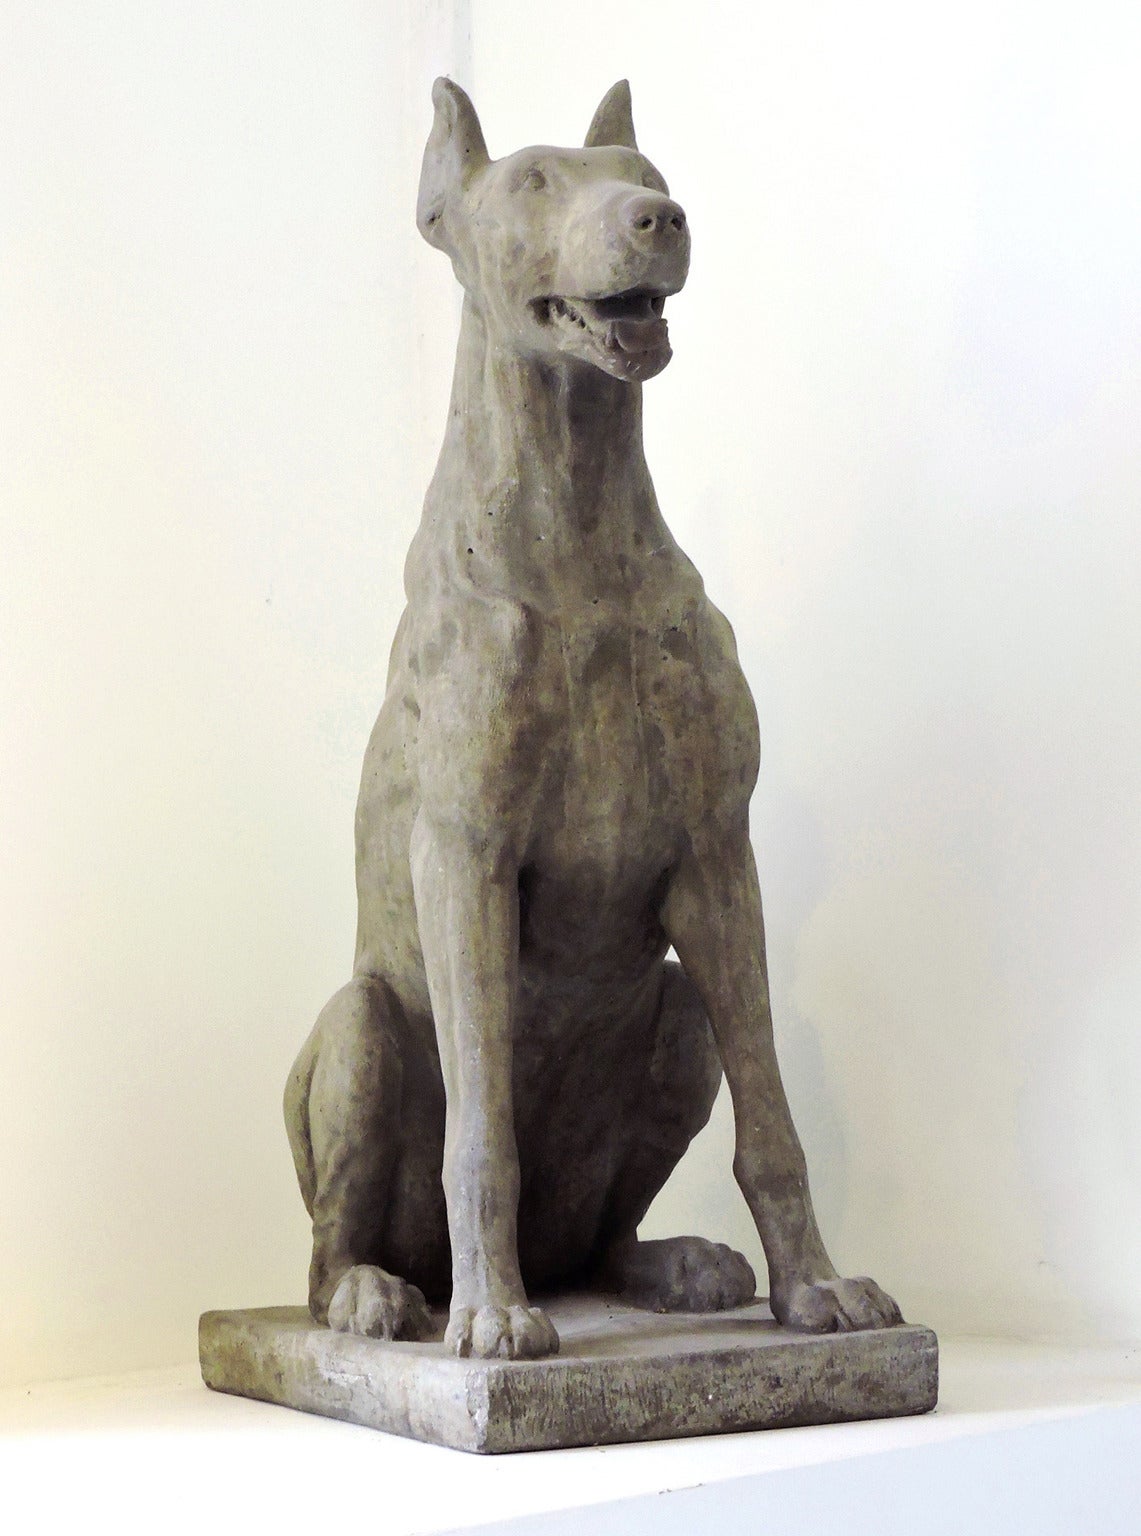 Pair of whimsical cast stone dogs, circa 1900-1920.
Height: 33 inches, depth: 21 1/2 inches, width: 12 inches.
Wonderful for garden statuary or for flanking an entryway.